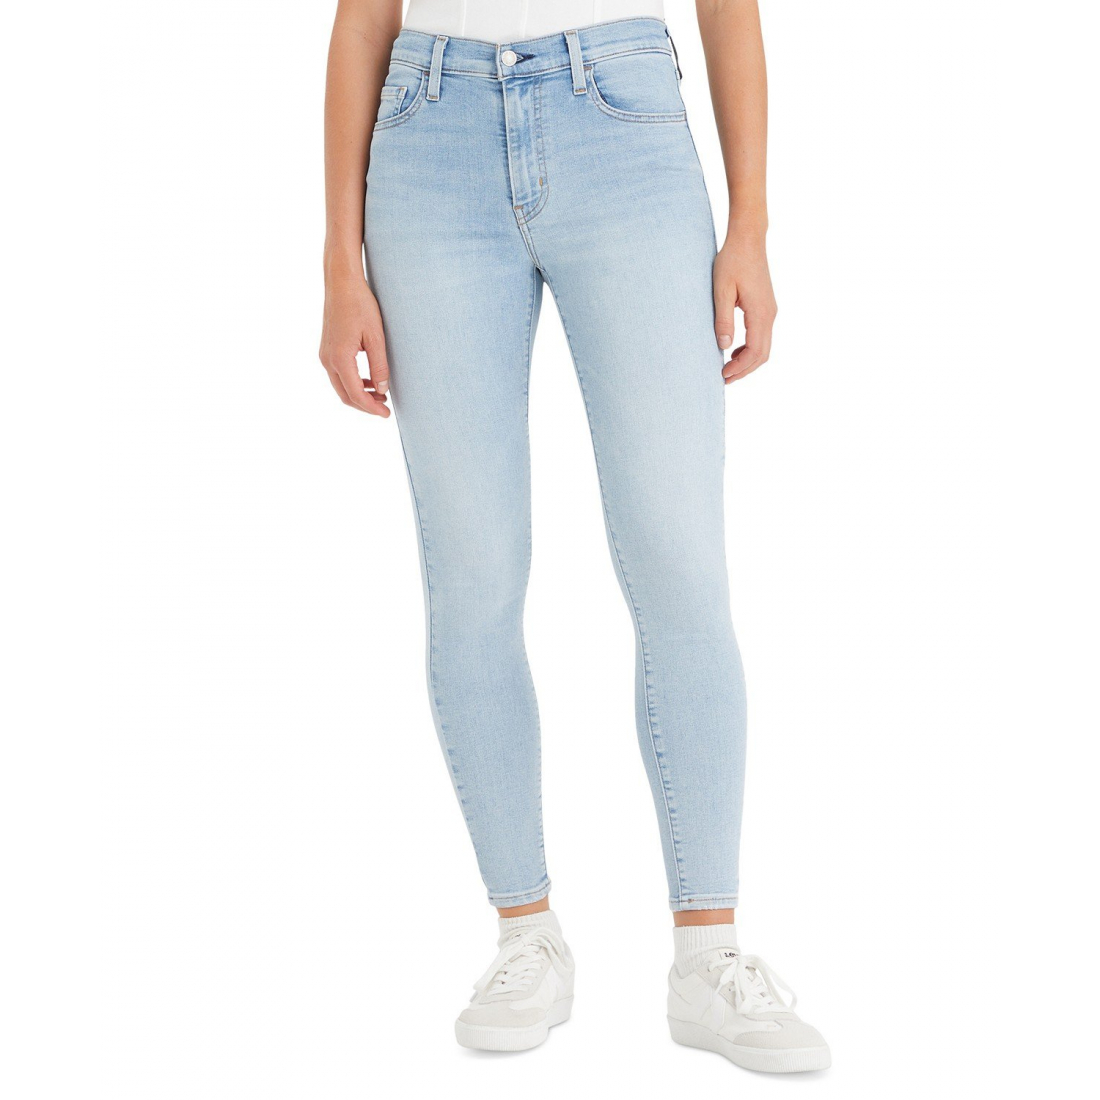 Women's '720 Stretchy' Jeans